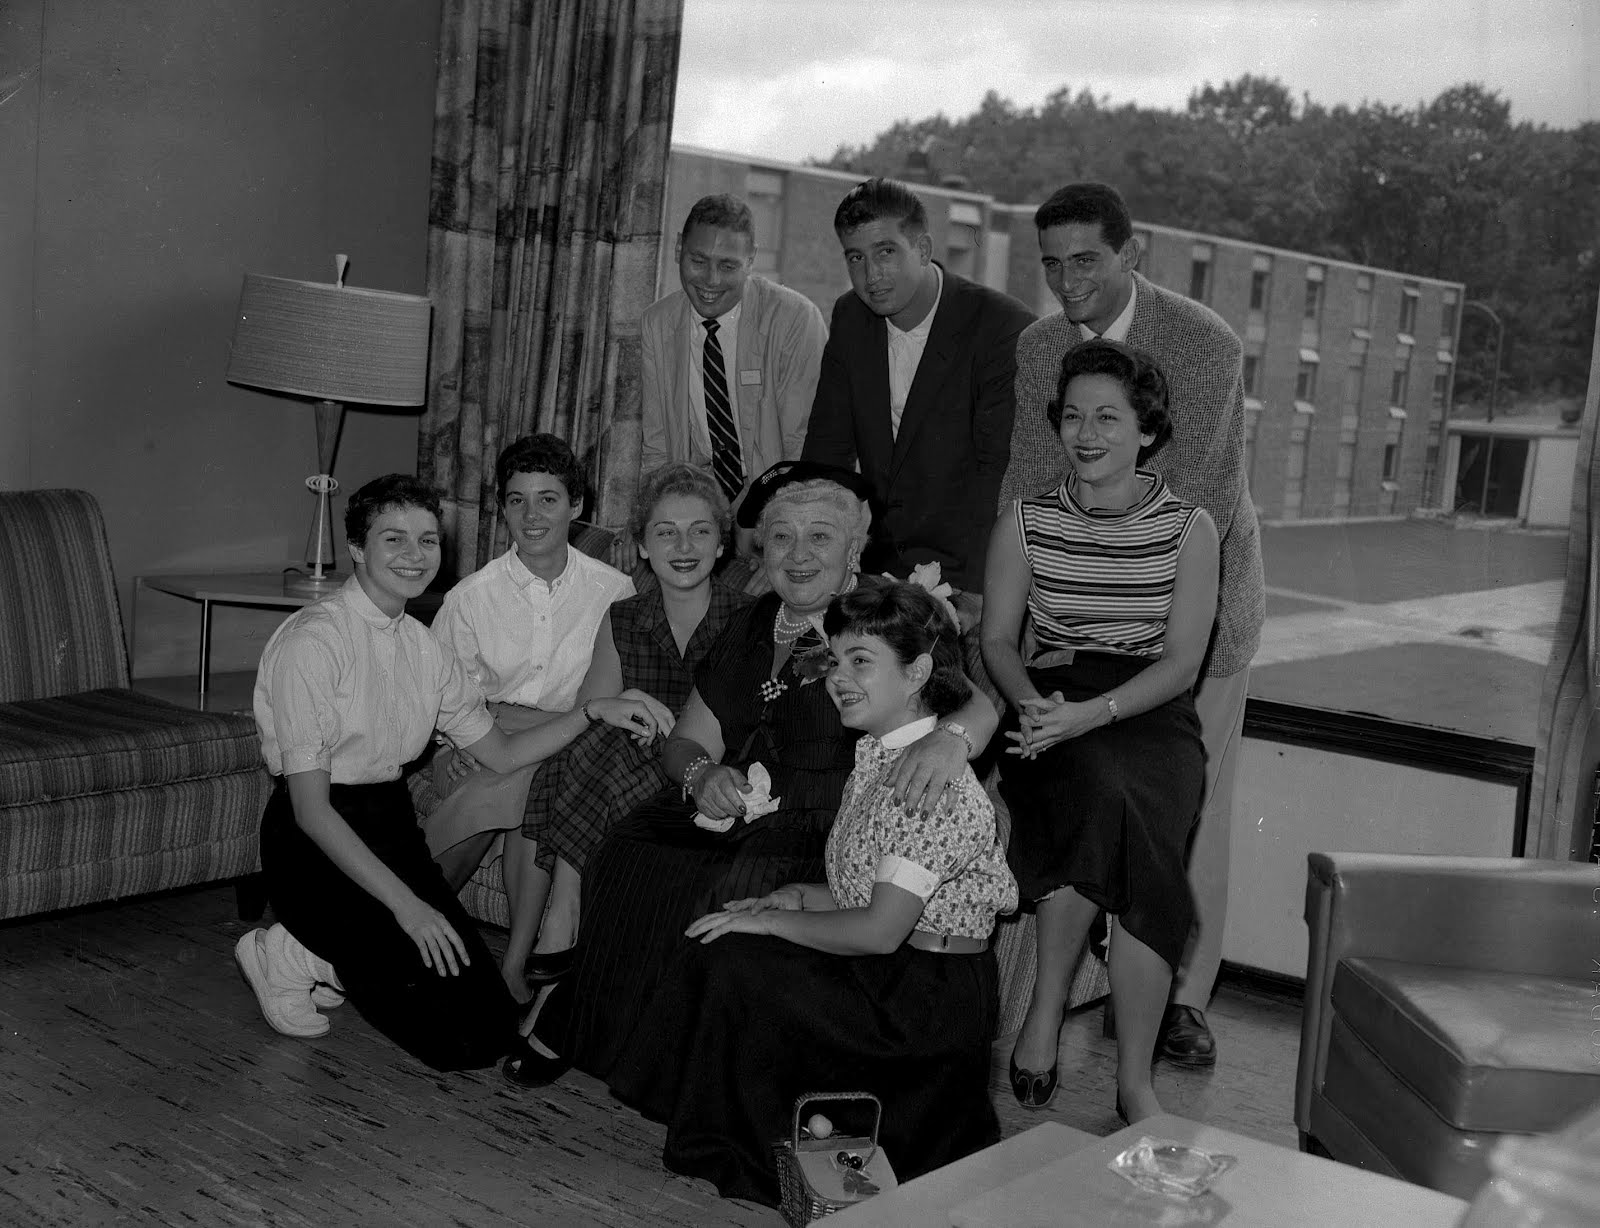 Black and white photograph of Sophie Tucker posing with students